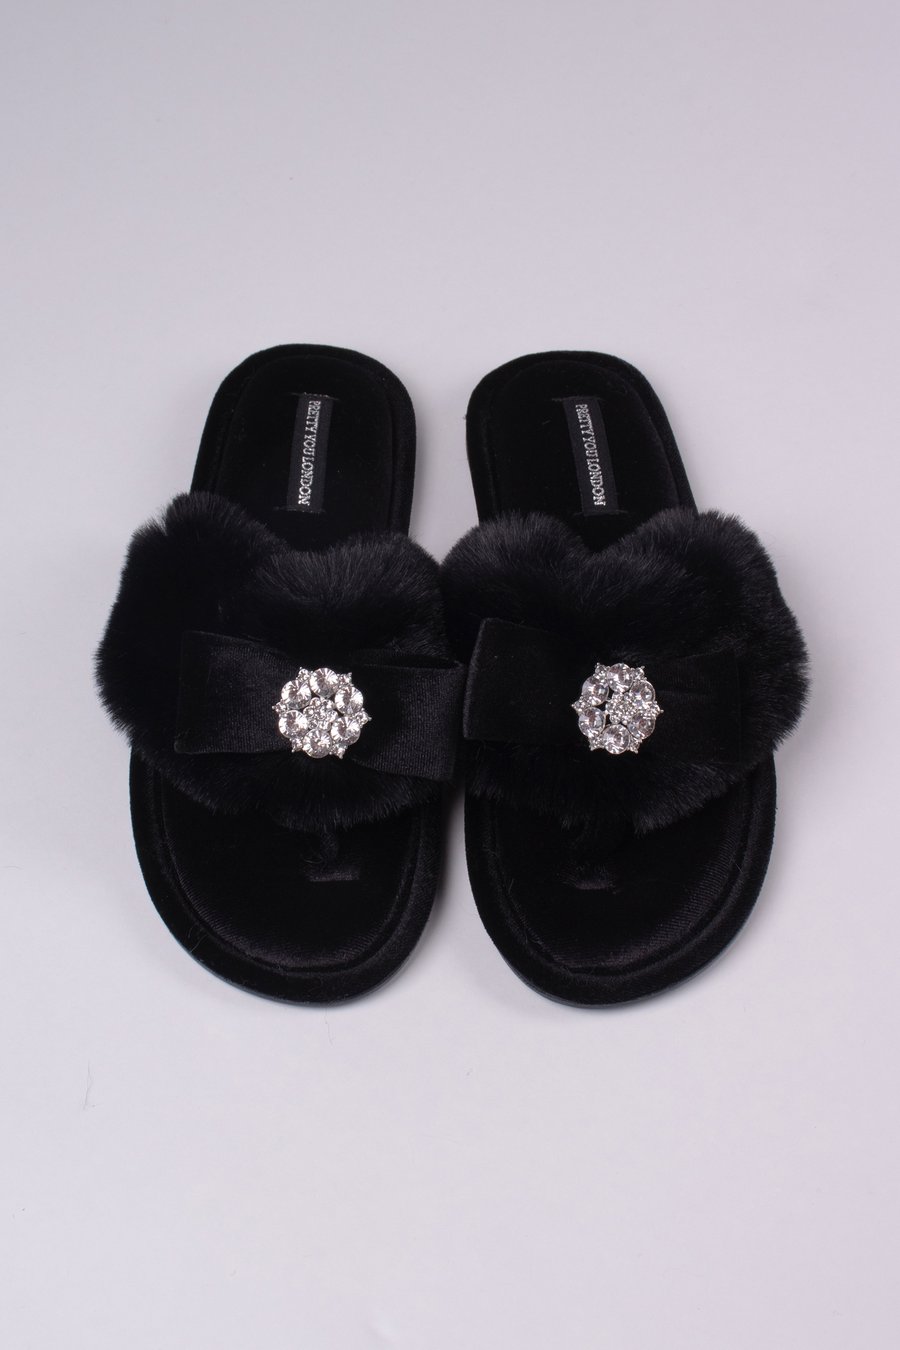 Pretty You London Amelie Luxury Diamante and Bow Open Toe post Slippers 